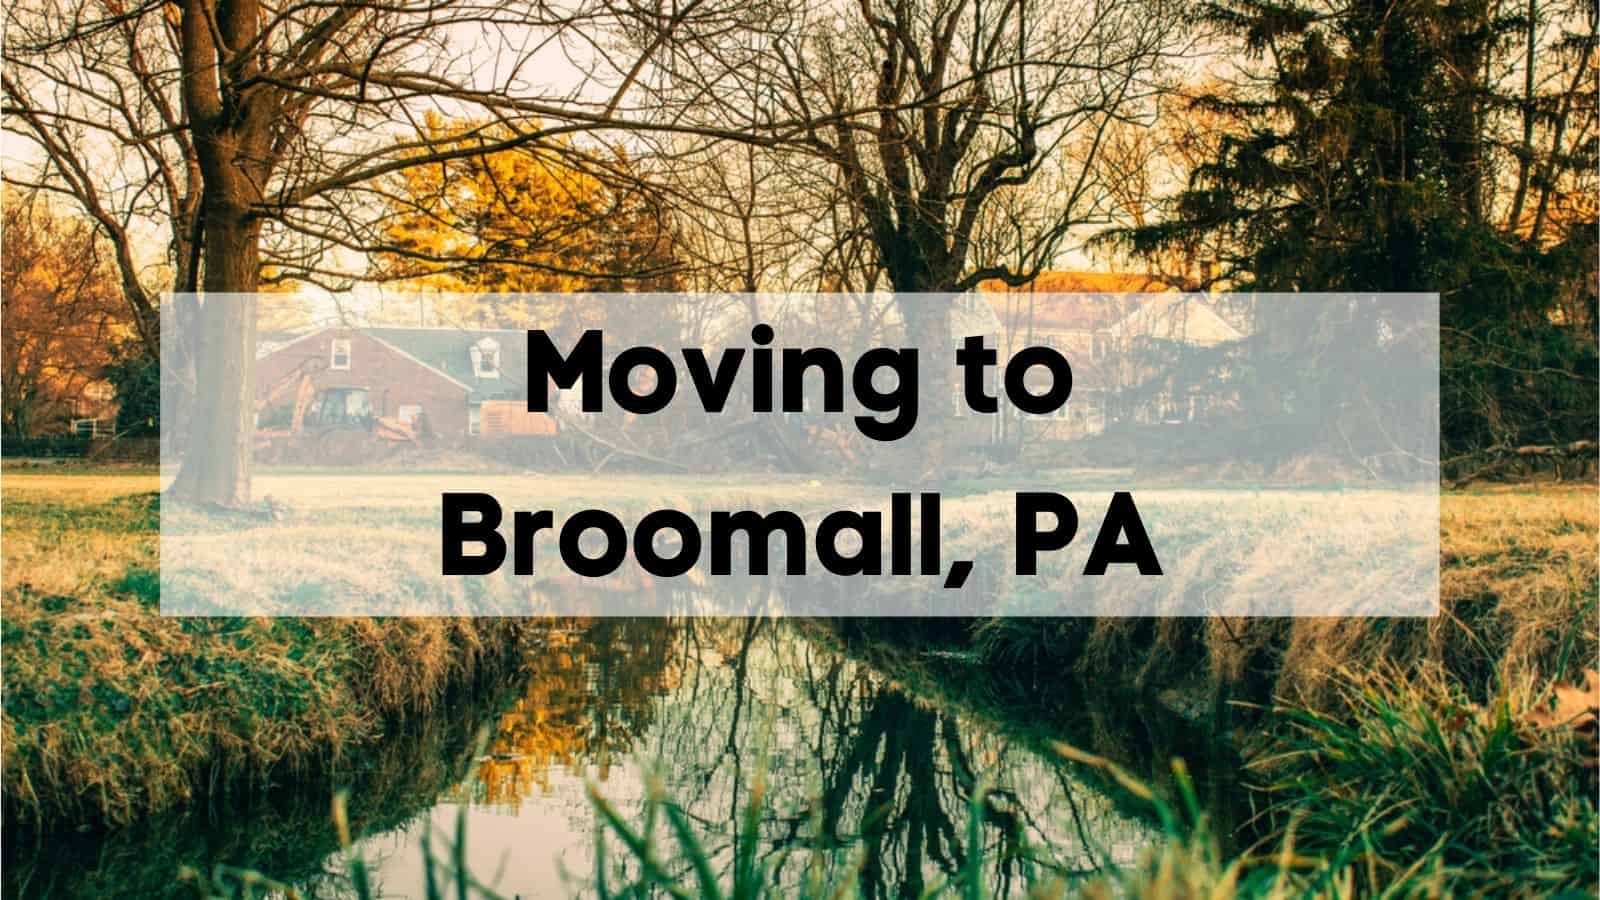 Moving to Broomall, PA